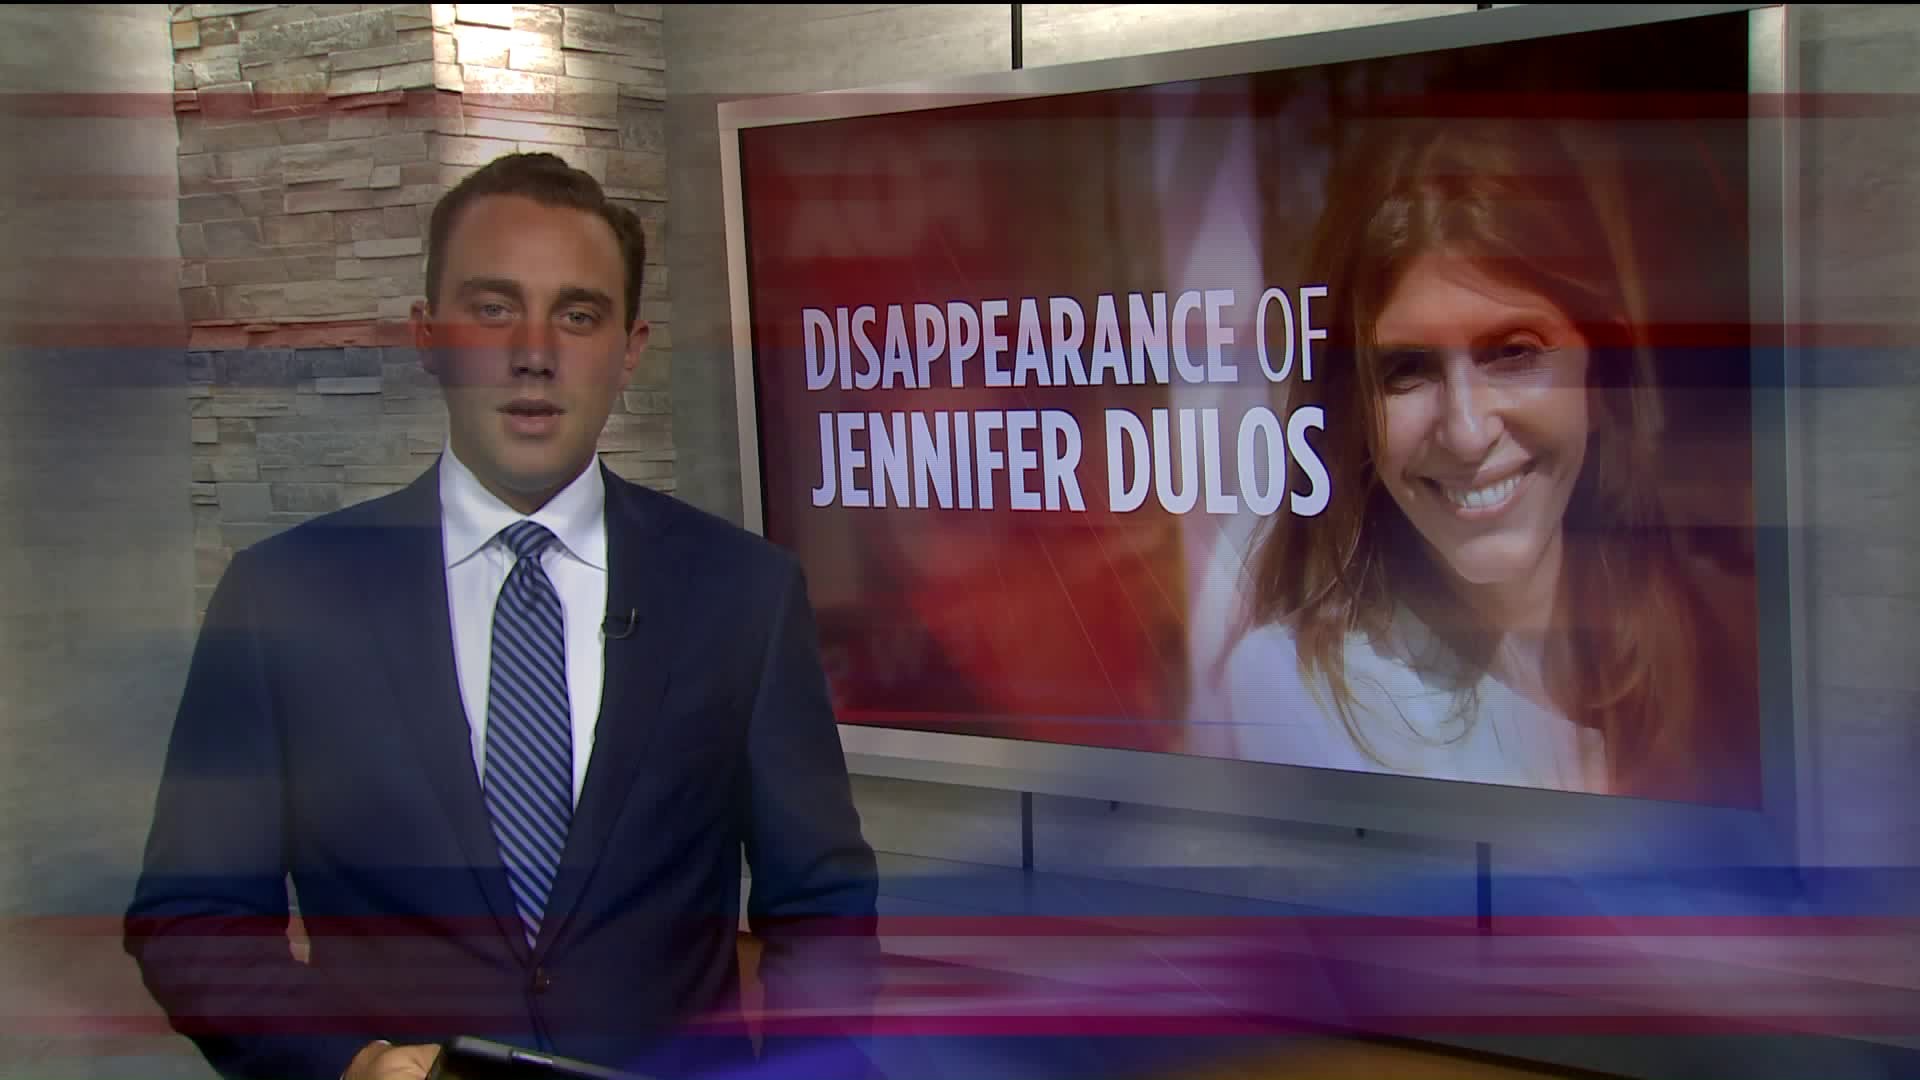 Jennifer Dulos’ friend says attorney’s allegation about medical records is ‘absurd’